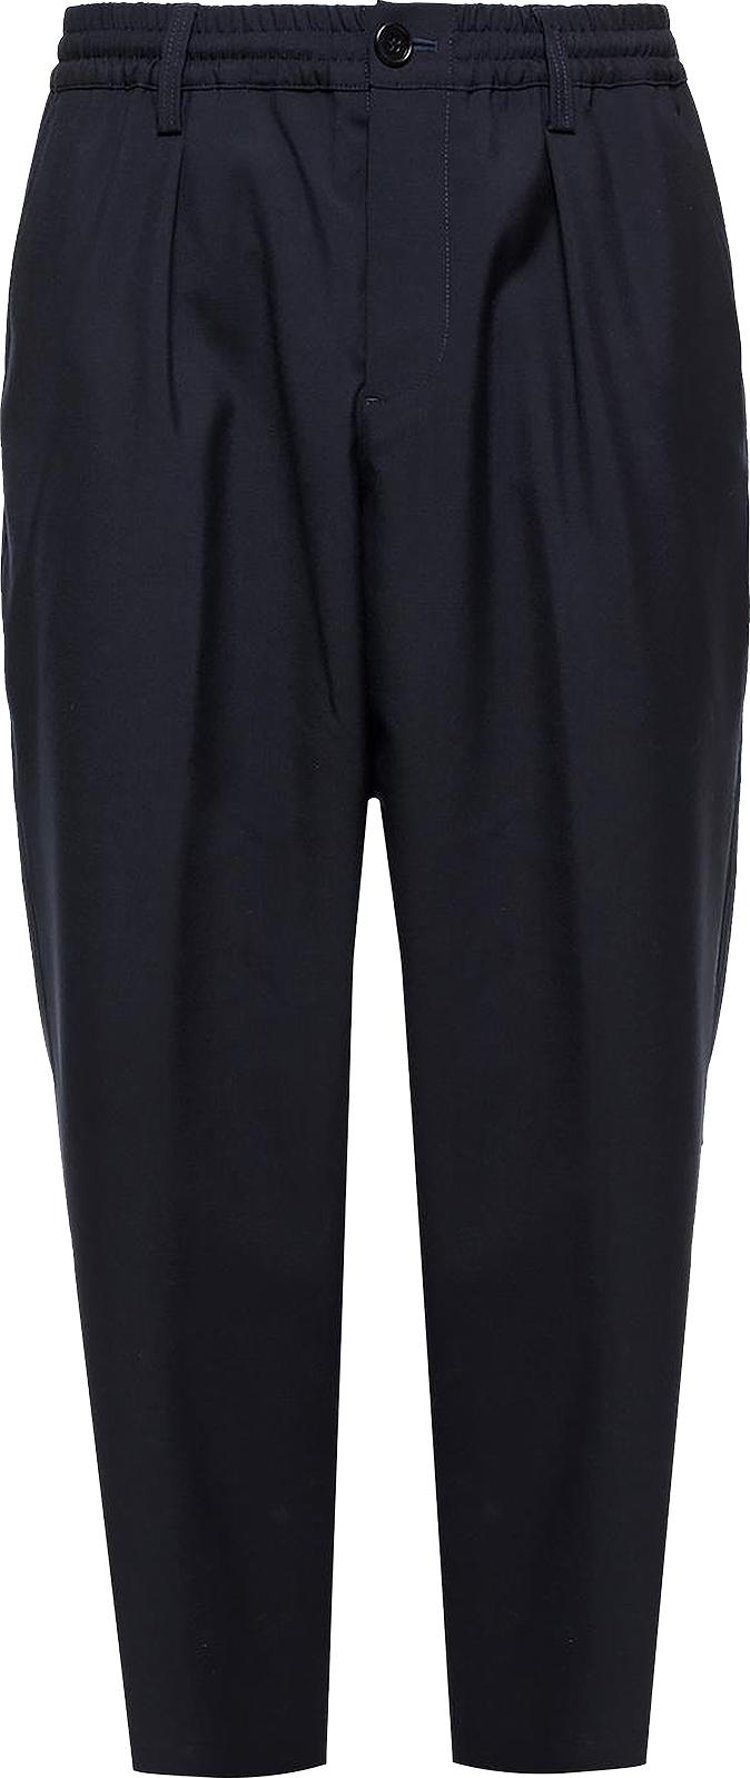 Marni Tropical Wool Trousers 'Blue Navy'